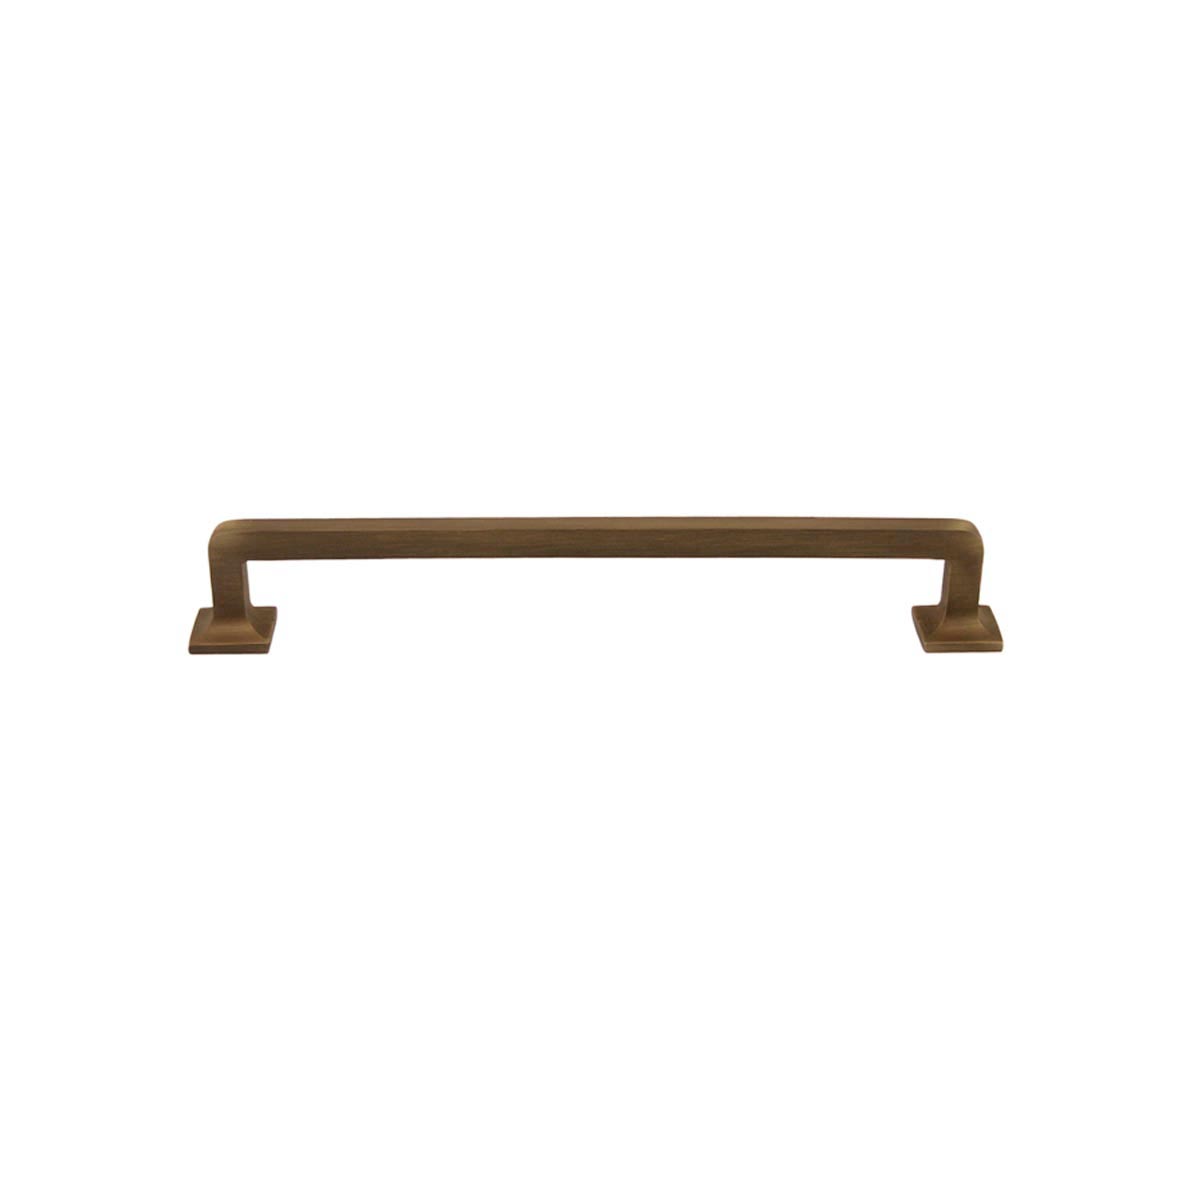 Substantial 8" Brass Cabinet Handle, Paxton Hardware